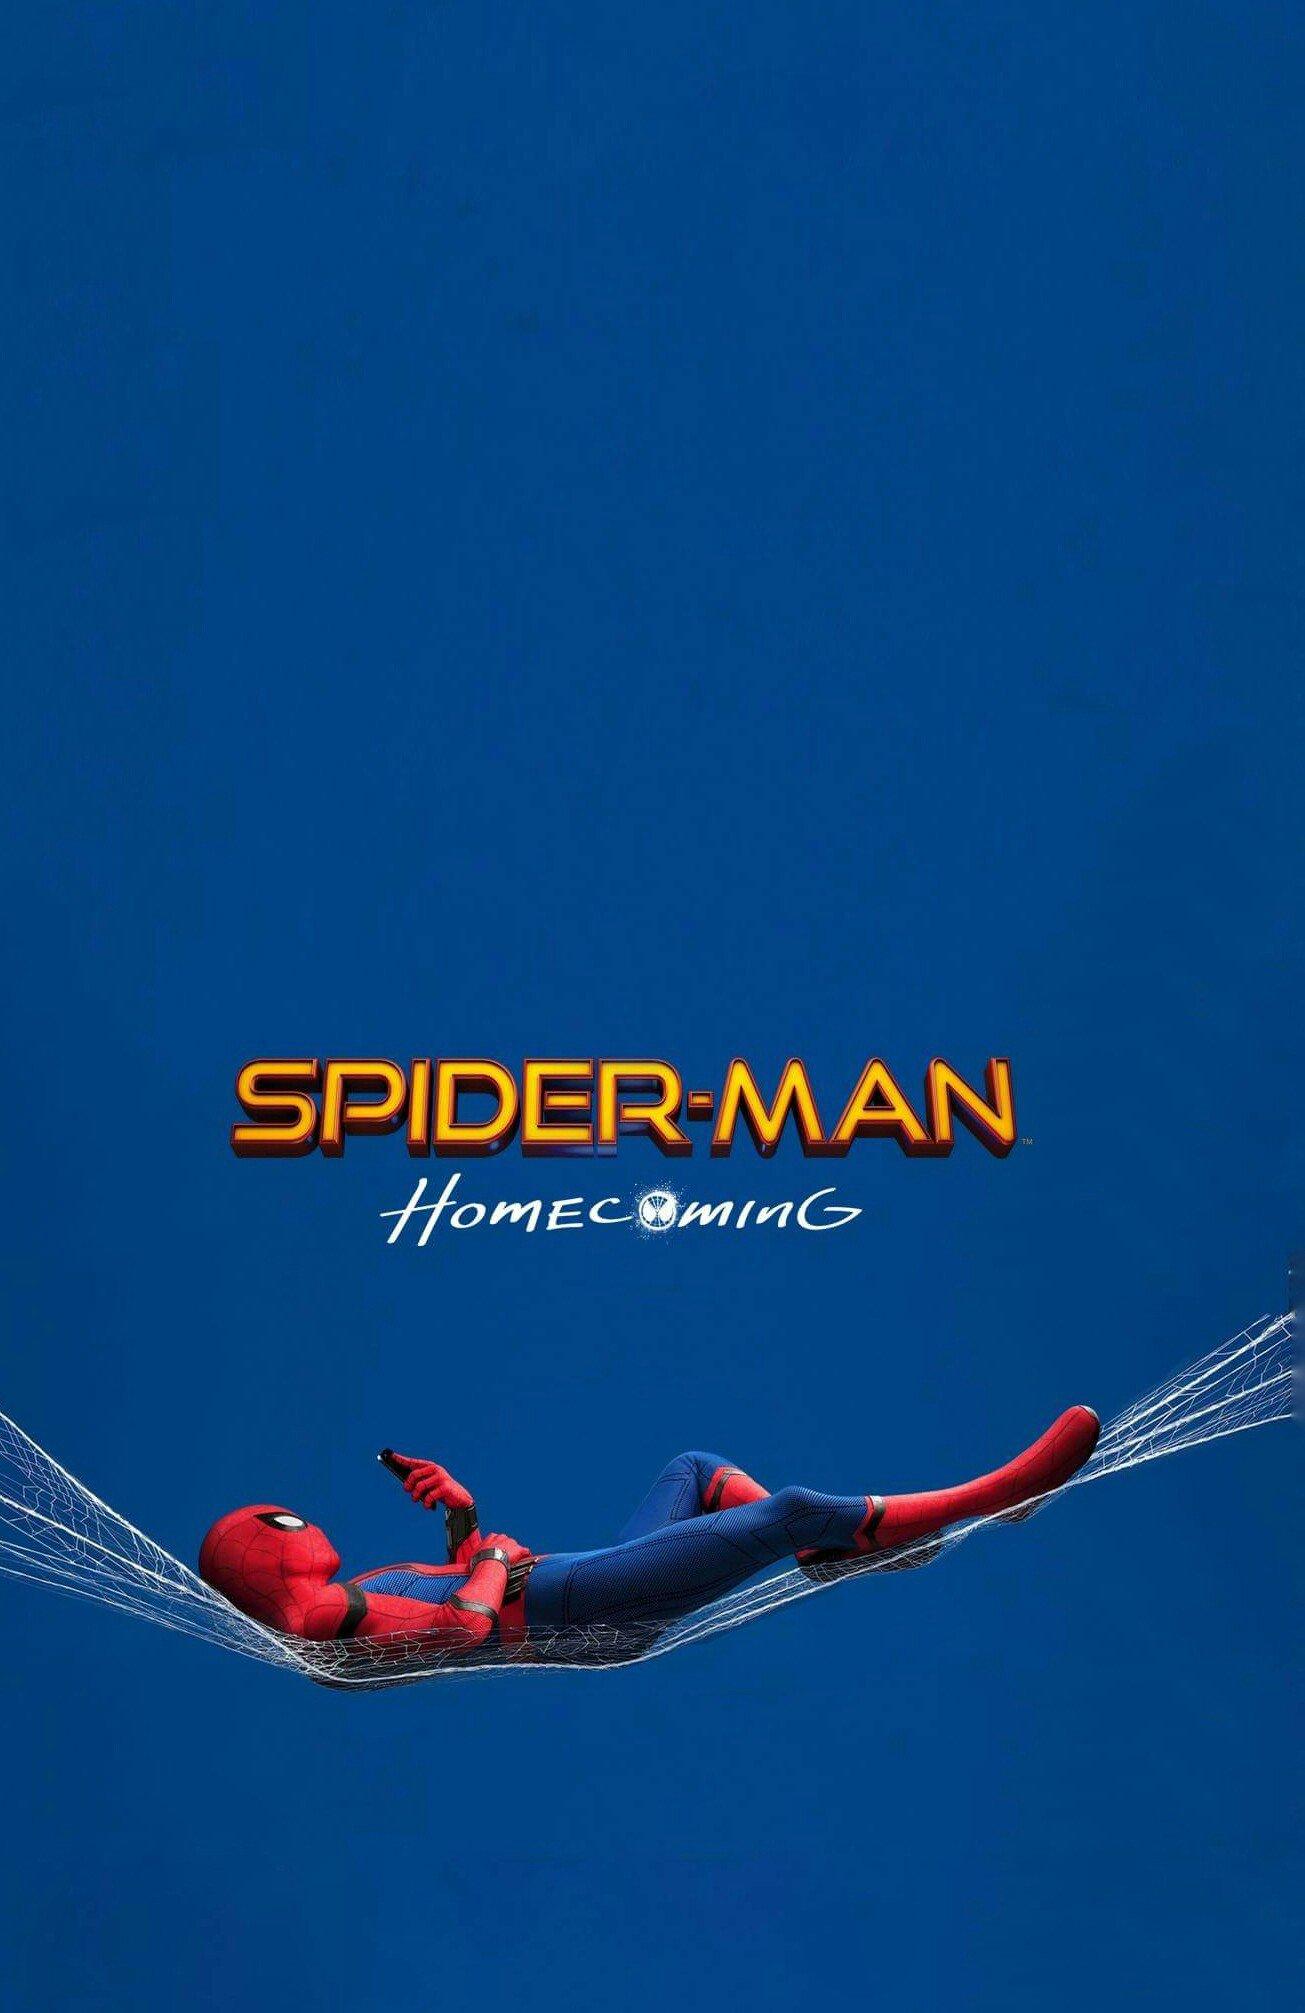 OC A phone wallpaper for the Homecoming hype